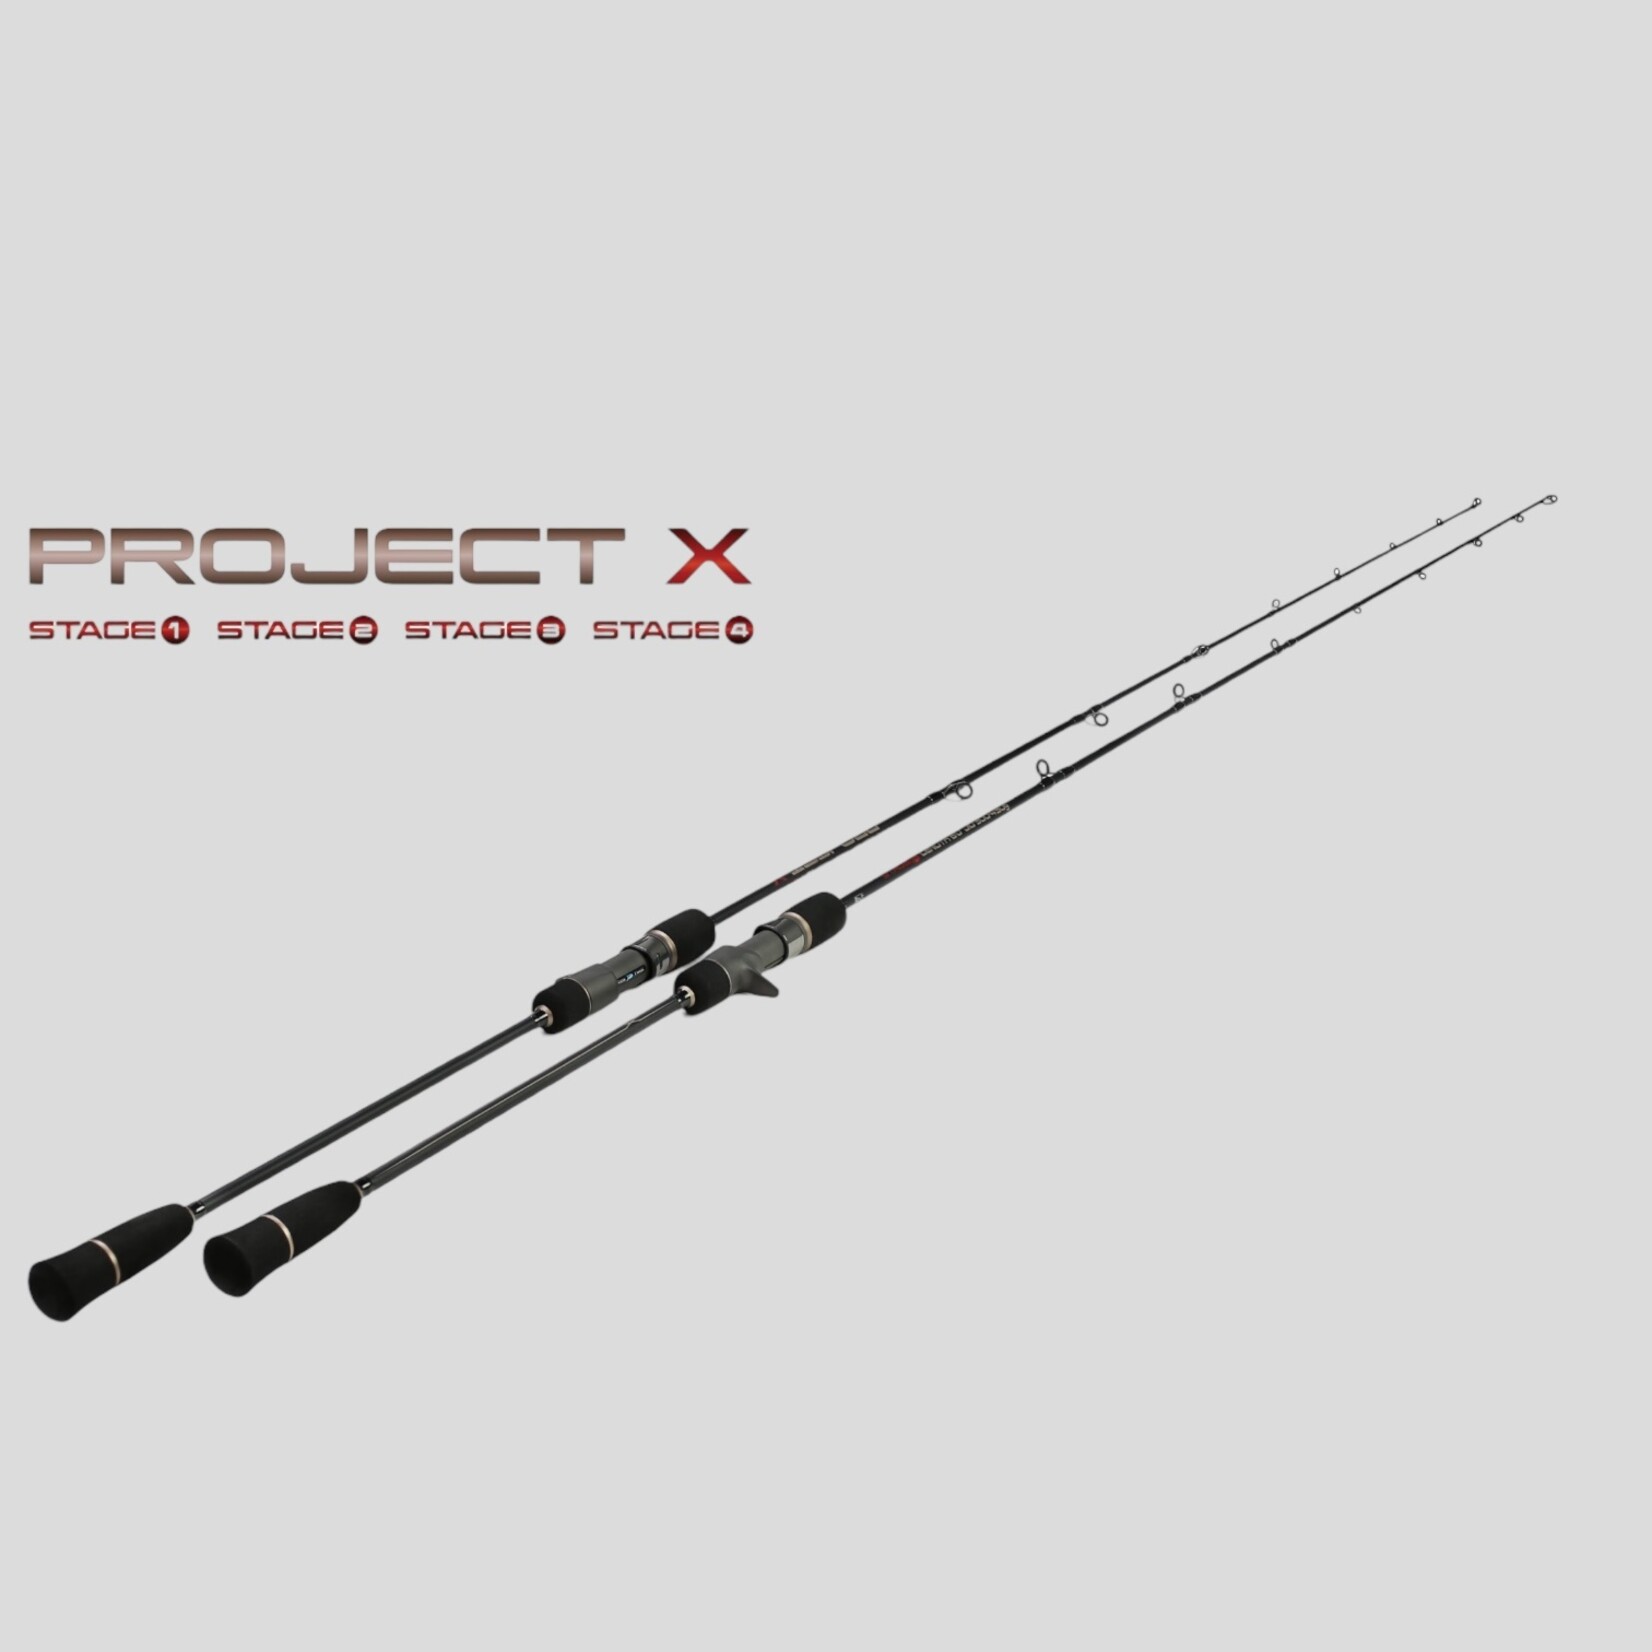 Temple Reef Project X Slow Pitch Rod - Tyalure Tackle